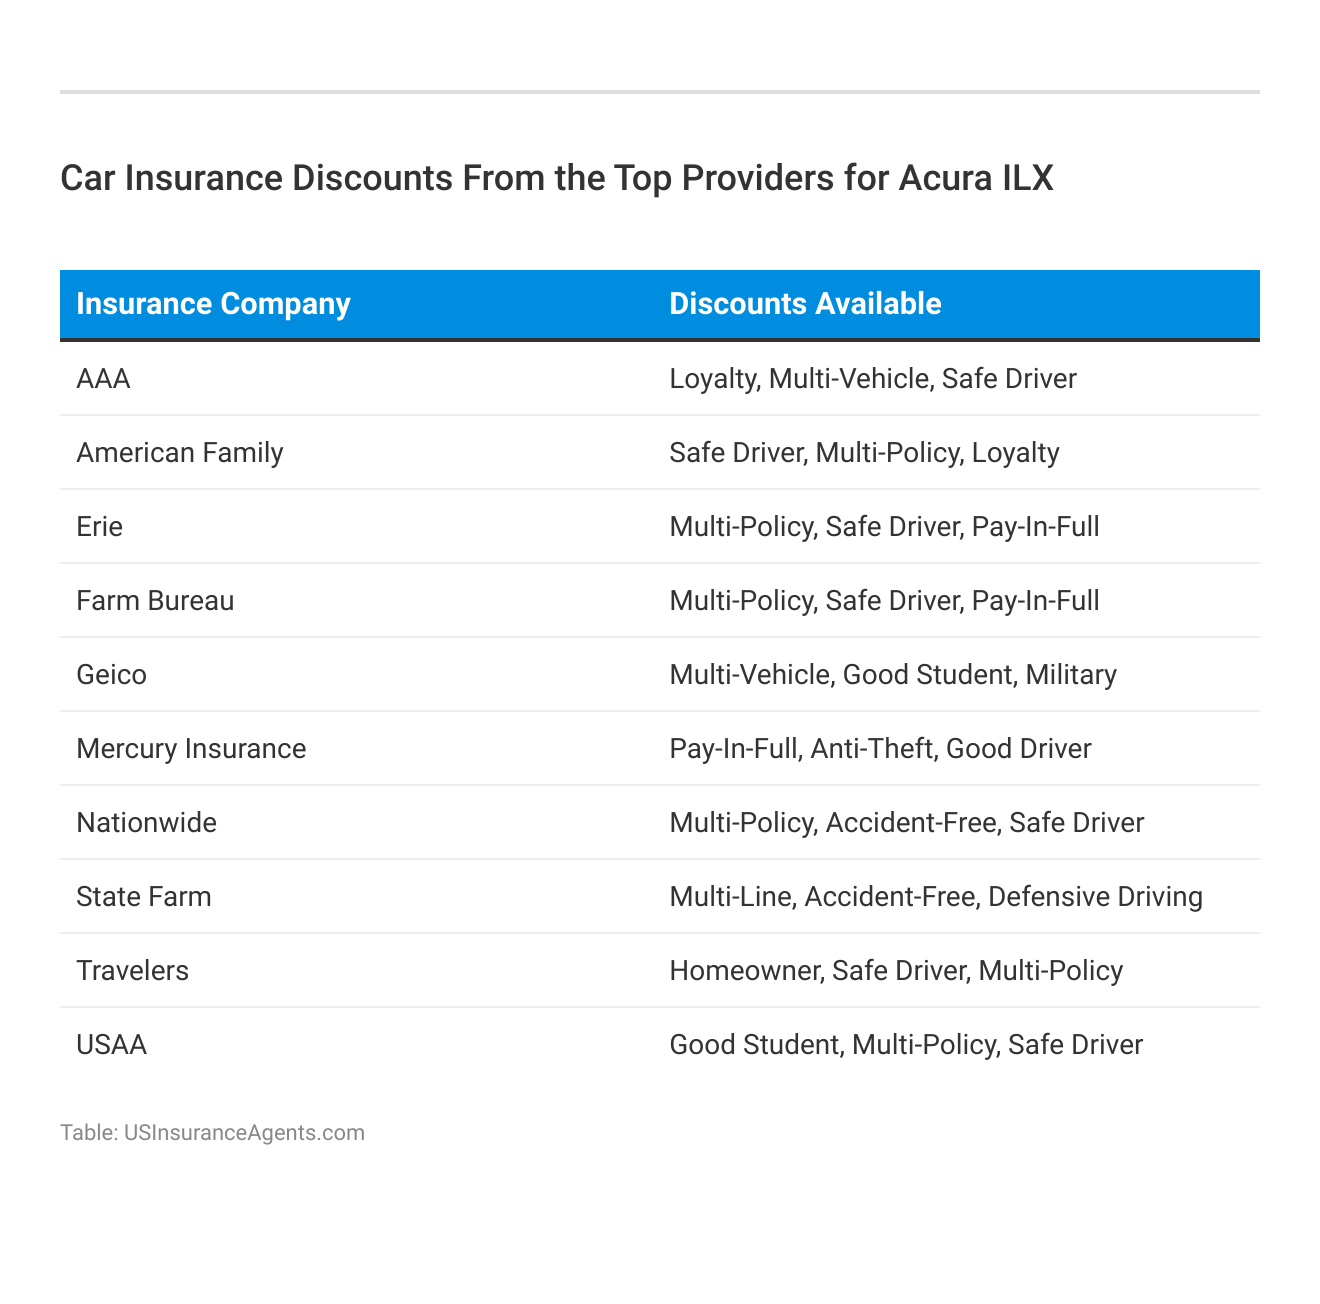 <h3>Car Insurance Discounts From the Top Providers for Acura ILX</h3>